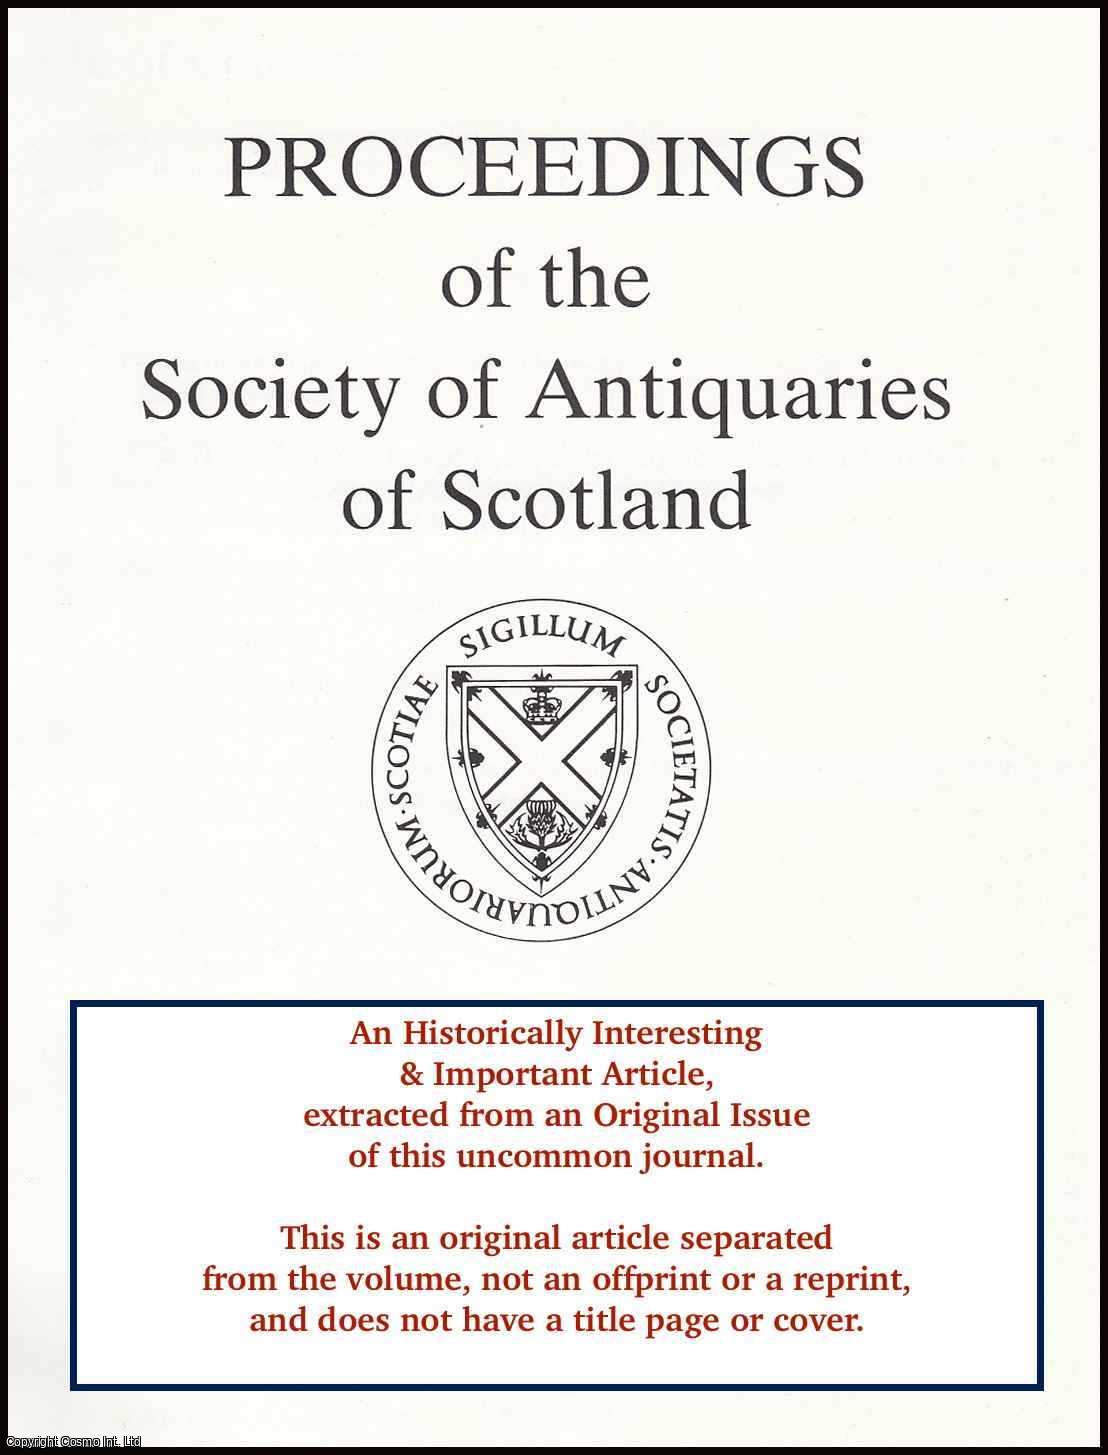 Ian A. G. Shepherd & T. G. Cowie - An Enlarged Food Vessel Urn Burial and Associated Artefacts From Kiltry Knock, Alvah, Banff and Buchan. An original article from the Proceedings of the Society of Antiquaries of Scotland, 1977.